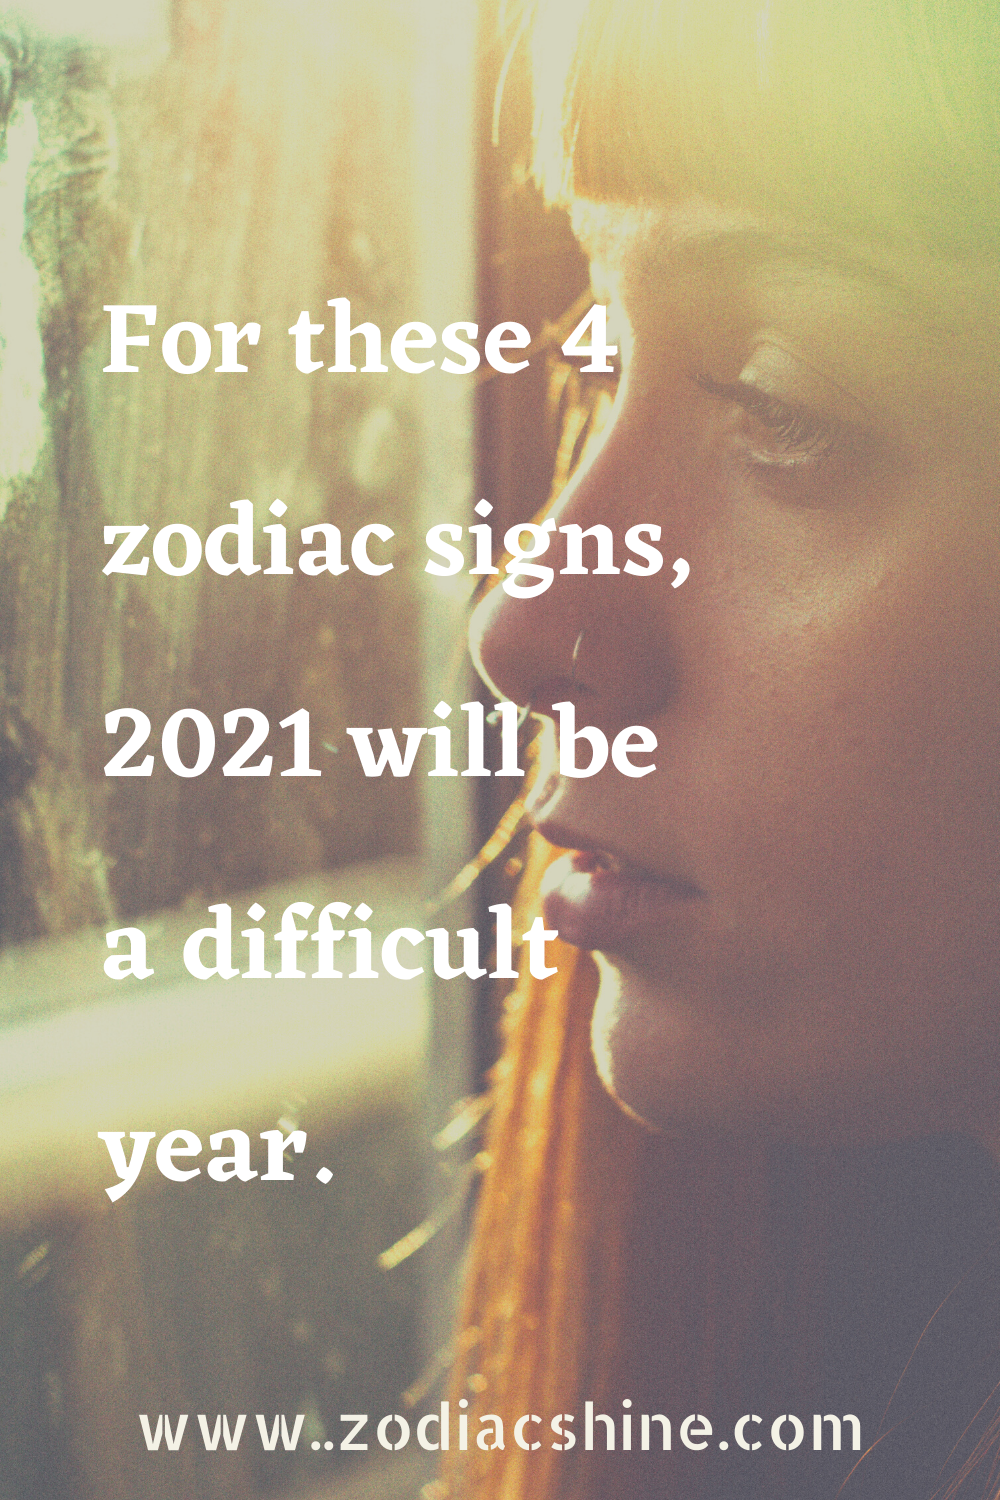 For these 4 zodiac signs, 2021 will be a difficult year.